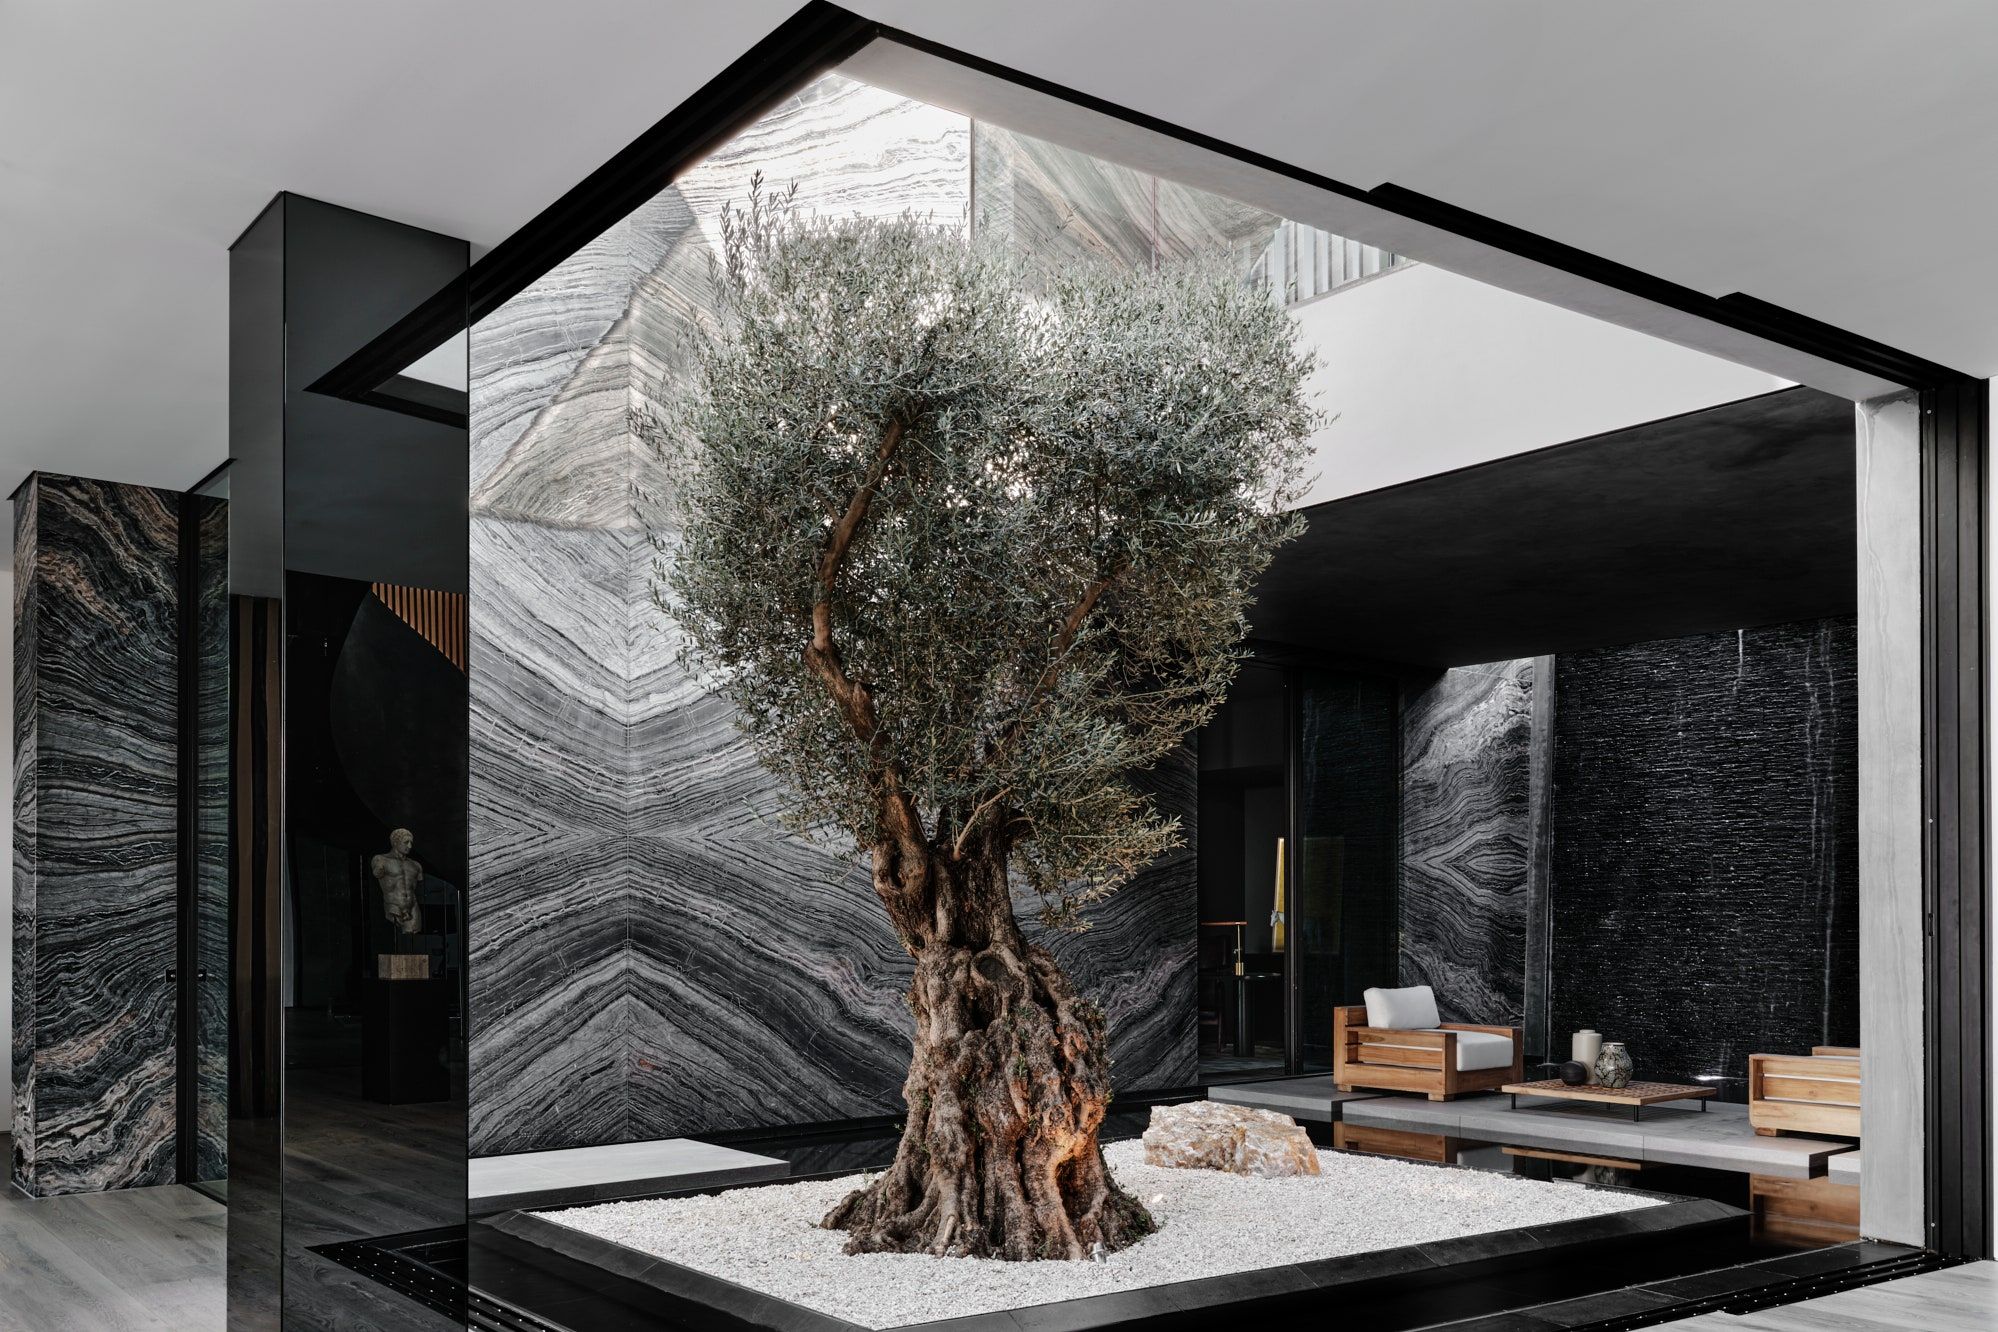 150-Year-Old Olive Tree in an Interior Courtyard